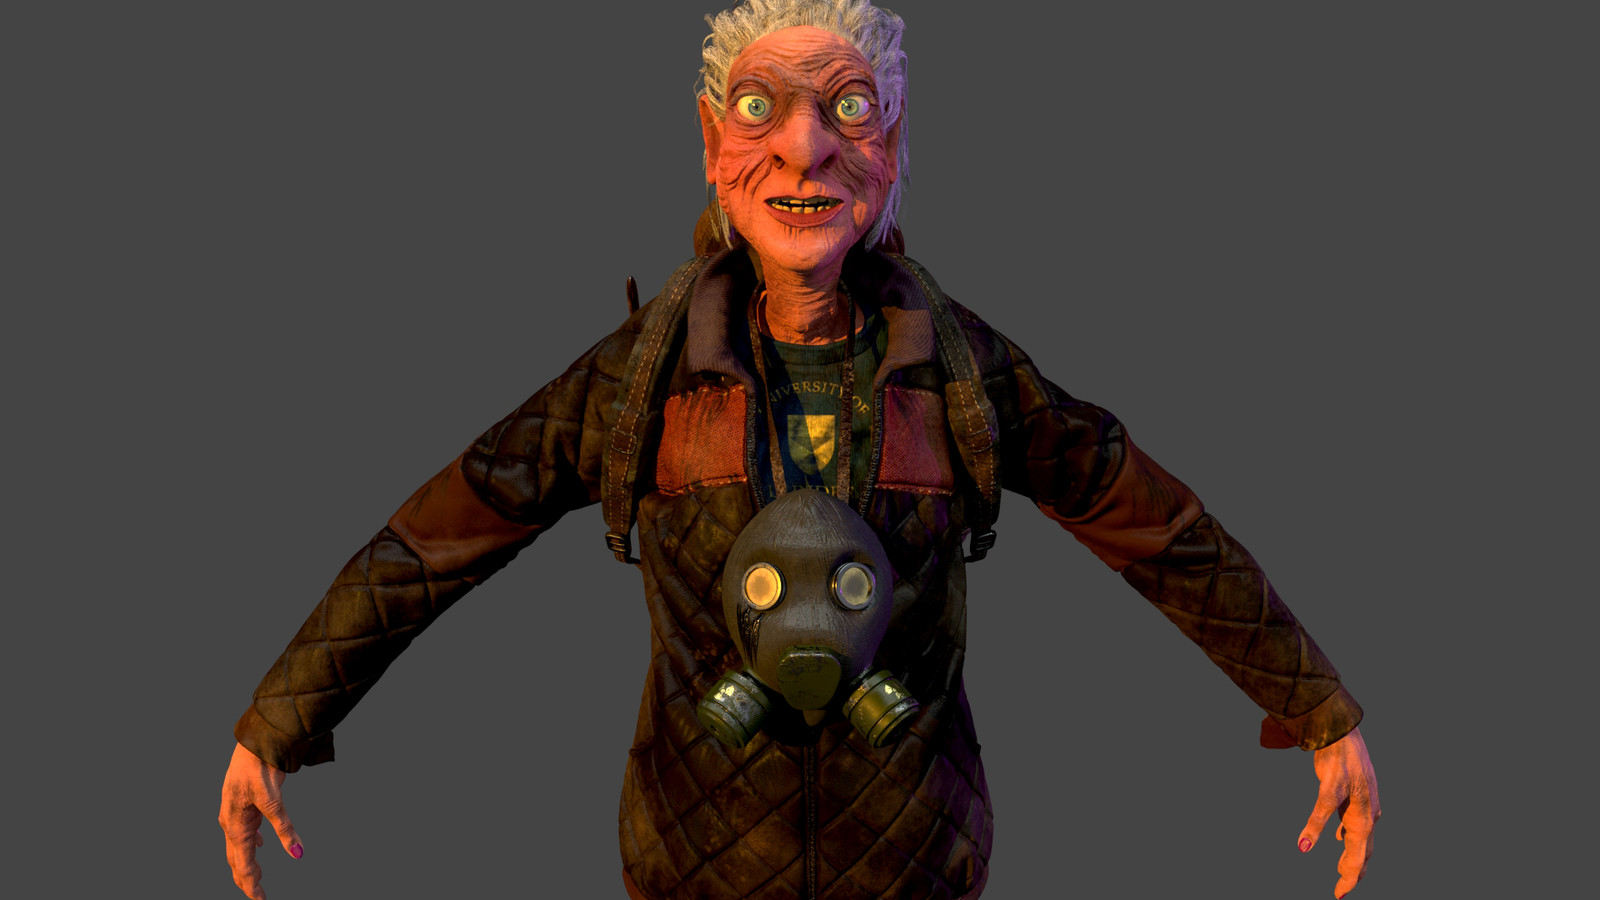 The lady has 47 4k resolution texture maps, I used displacement maps for her skin and leather materials.